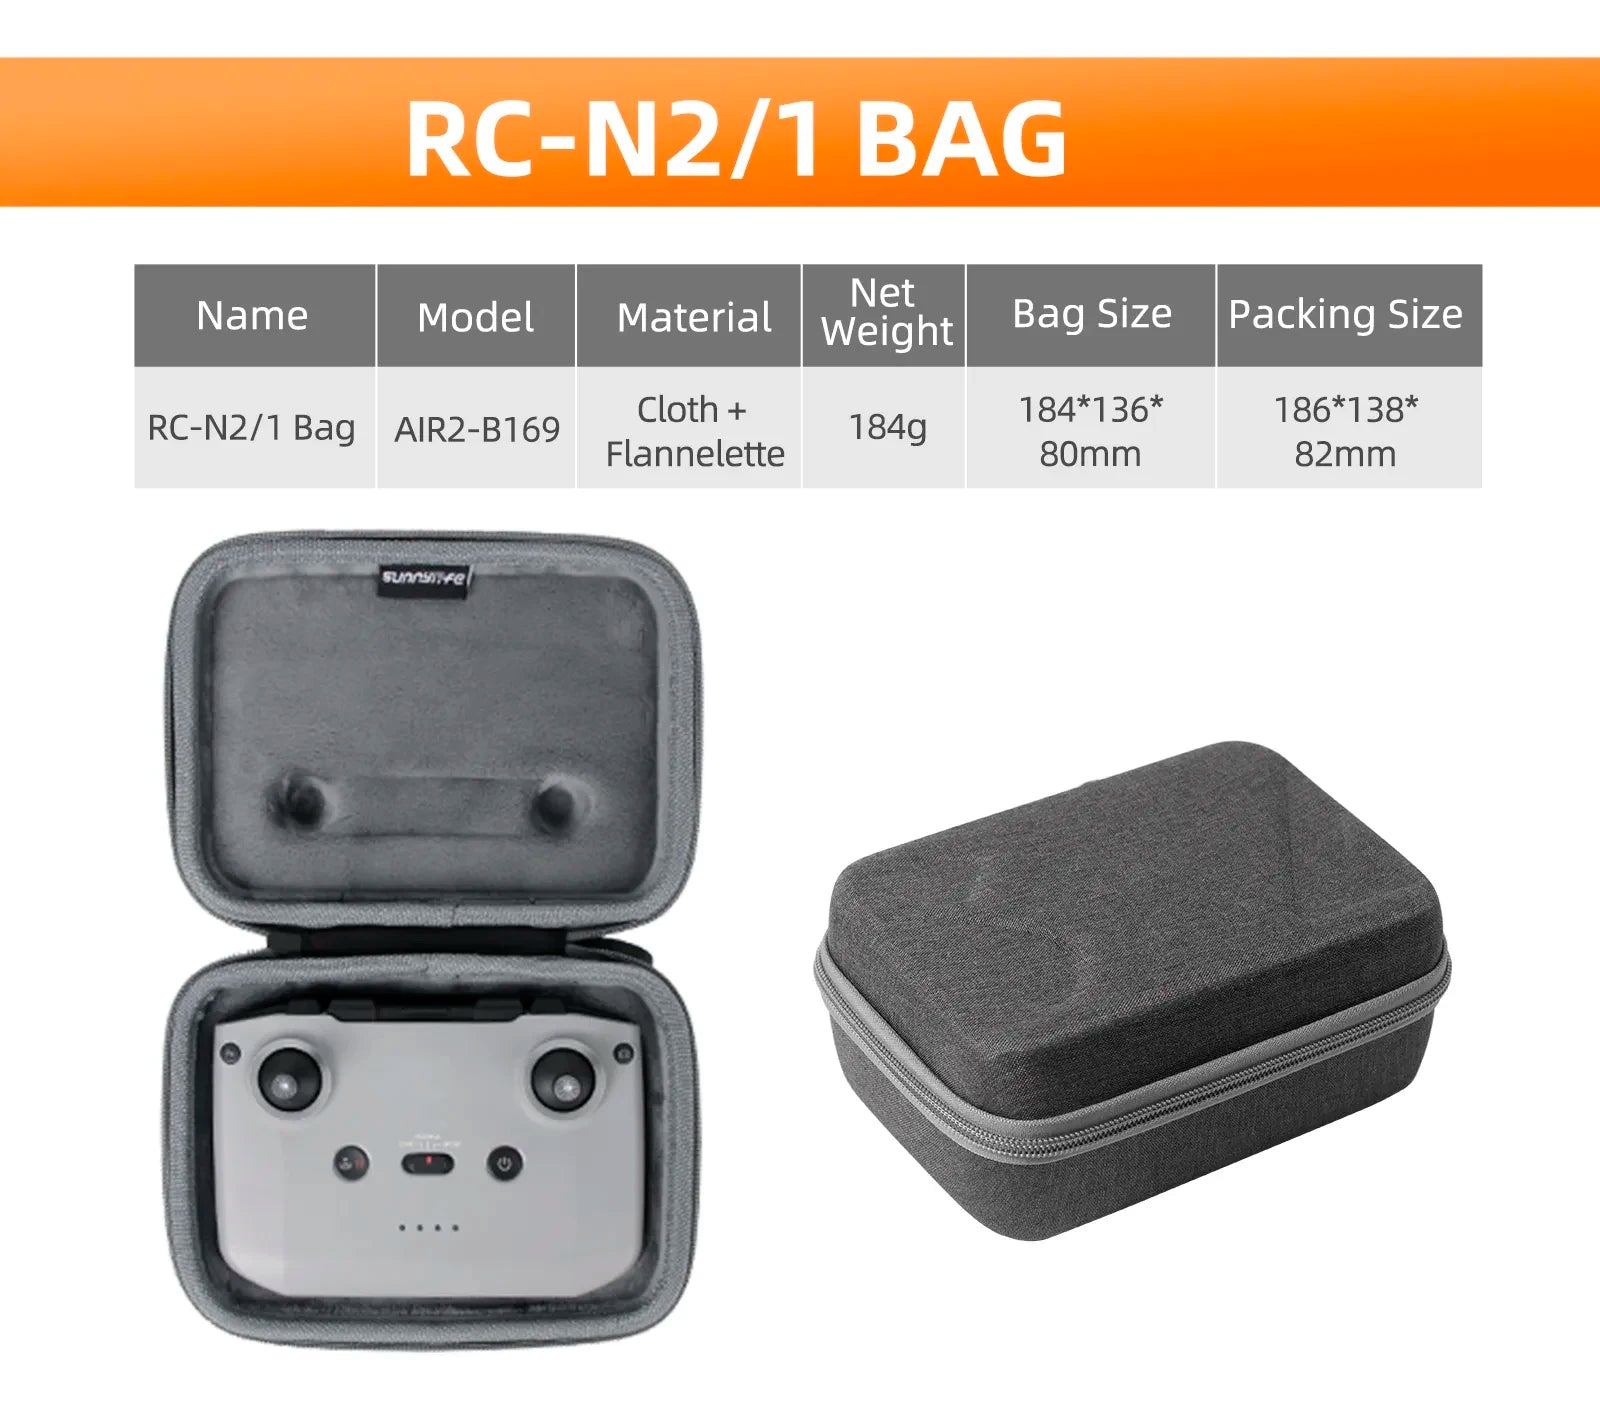 Portable Carrying Case For DJI Mini 4 Pro, RC-N2/1 BAG Net Name Model Material Weight Bag Size Packing Size Clo